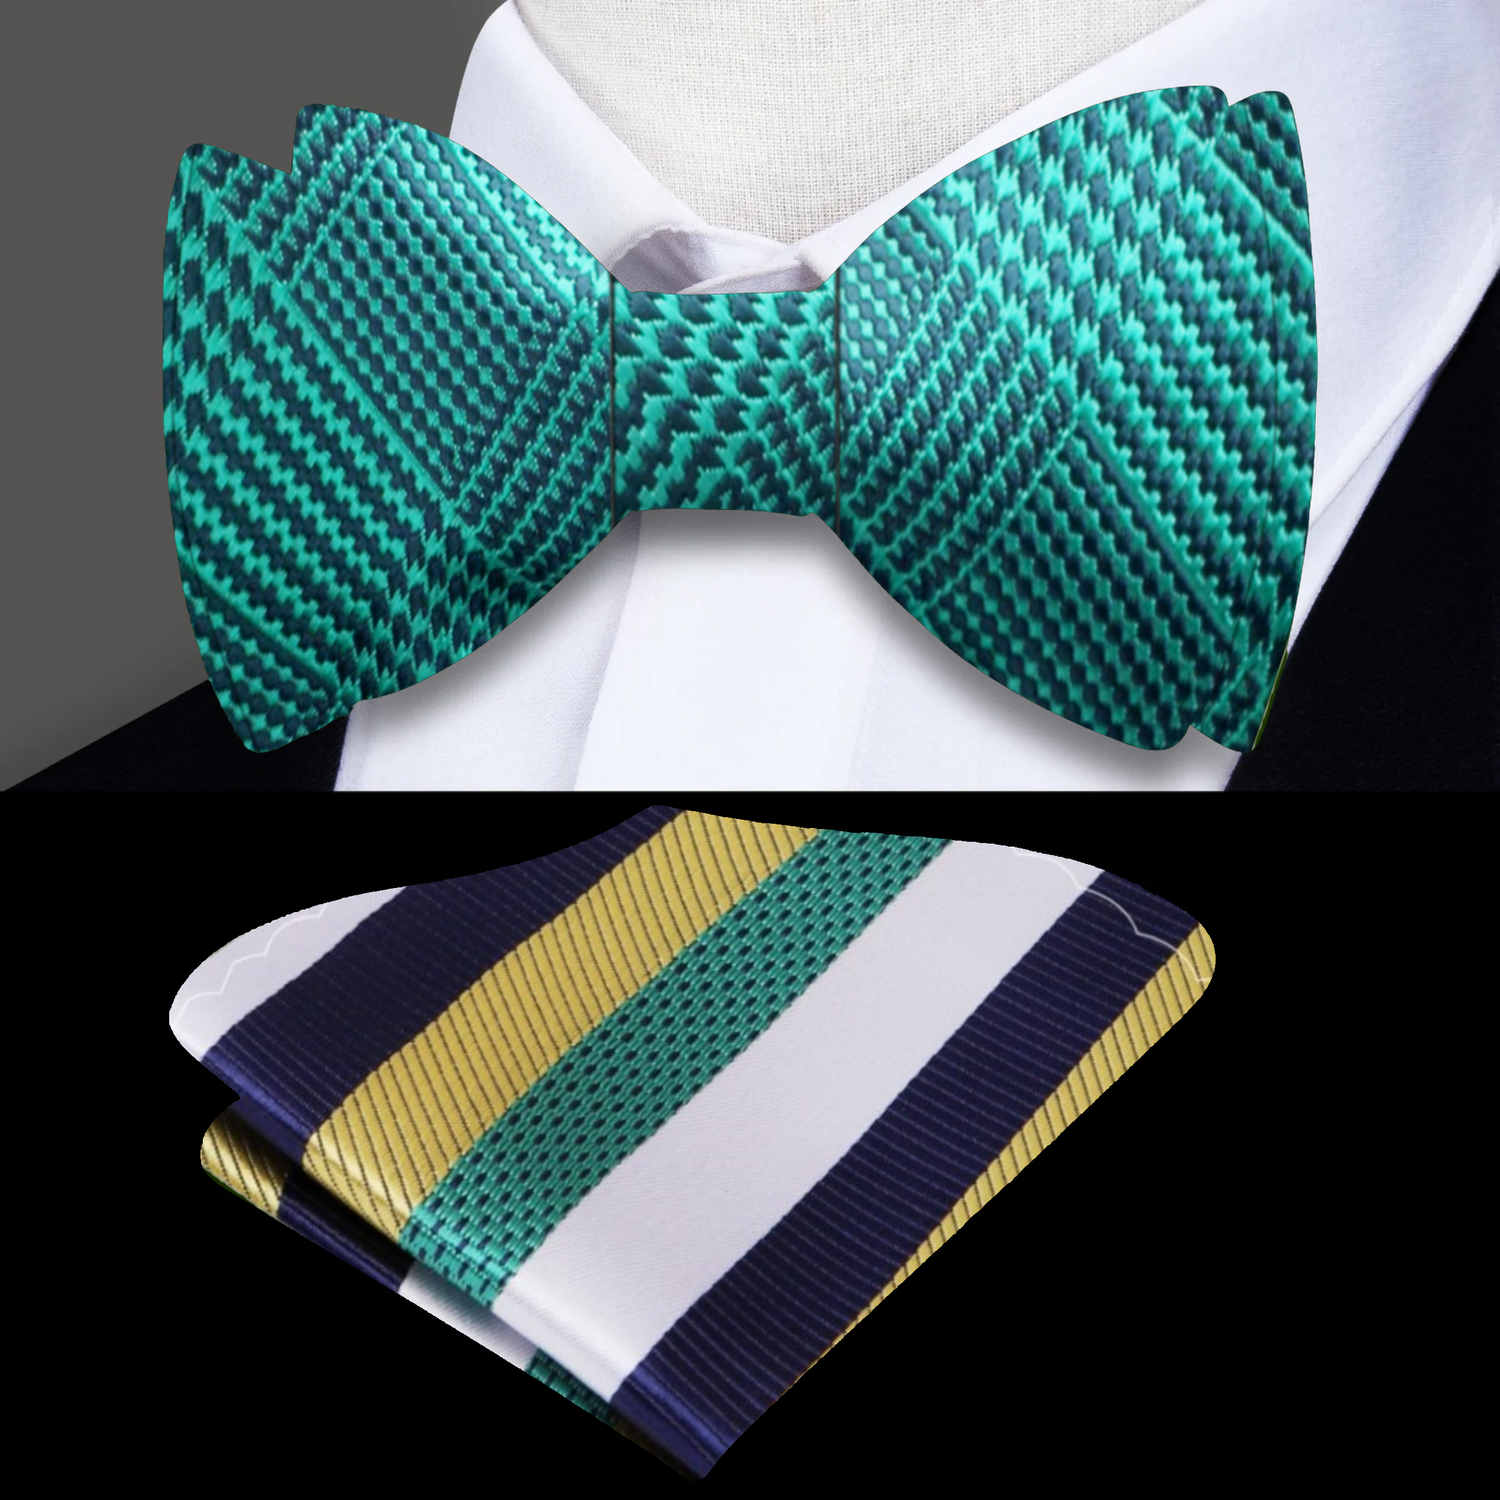 Main: Green Plaid Self Tie Bow Tie and Accenting Green, Blue, White and Gold Stripe Pocket Square